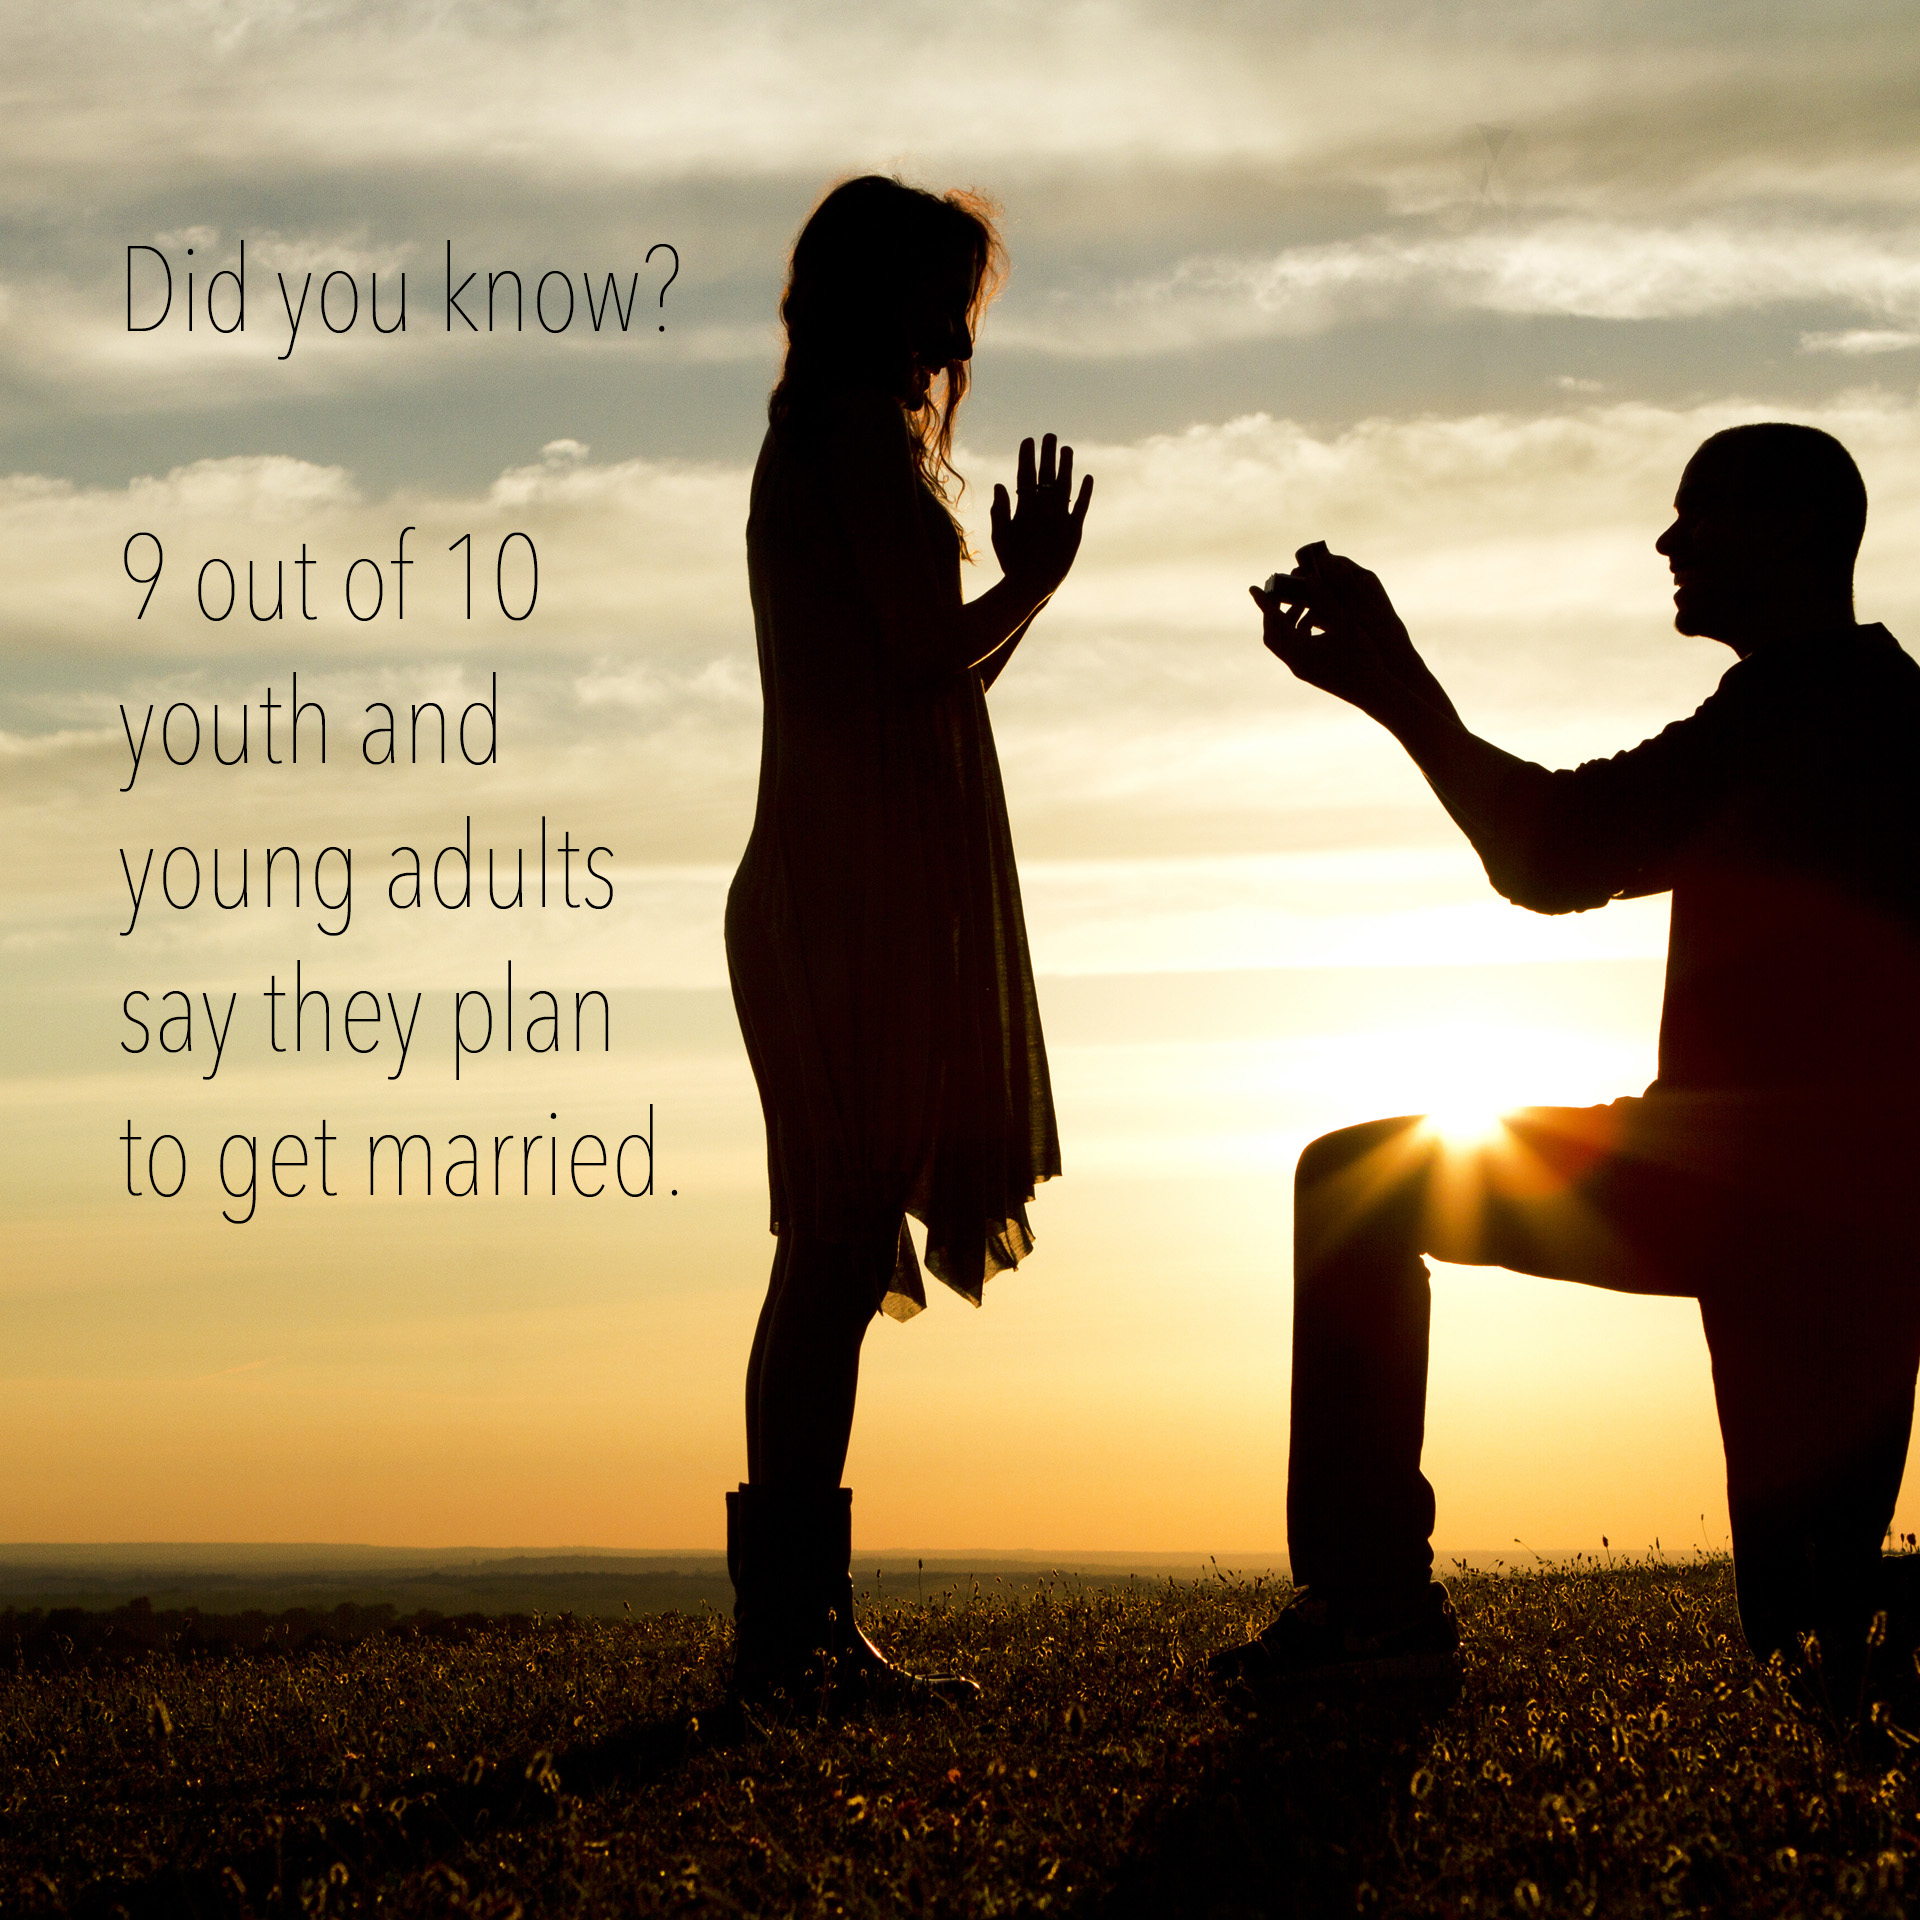 Did you know? 9 out of 10 youth and young adults say they plan to get married.